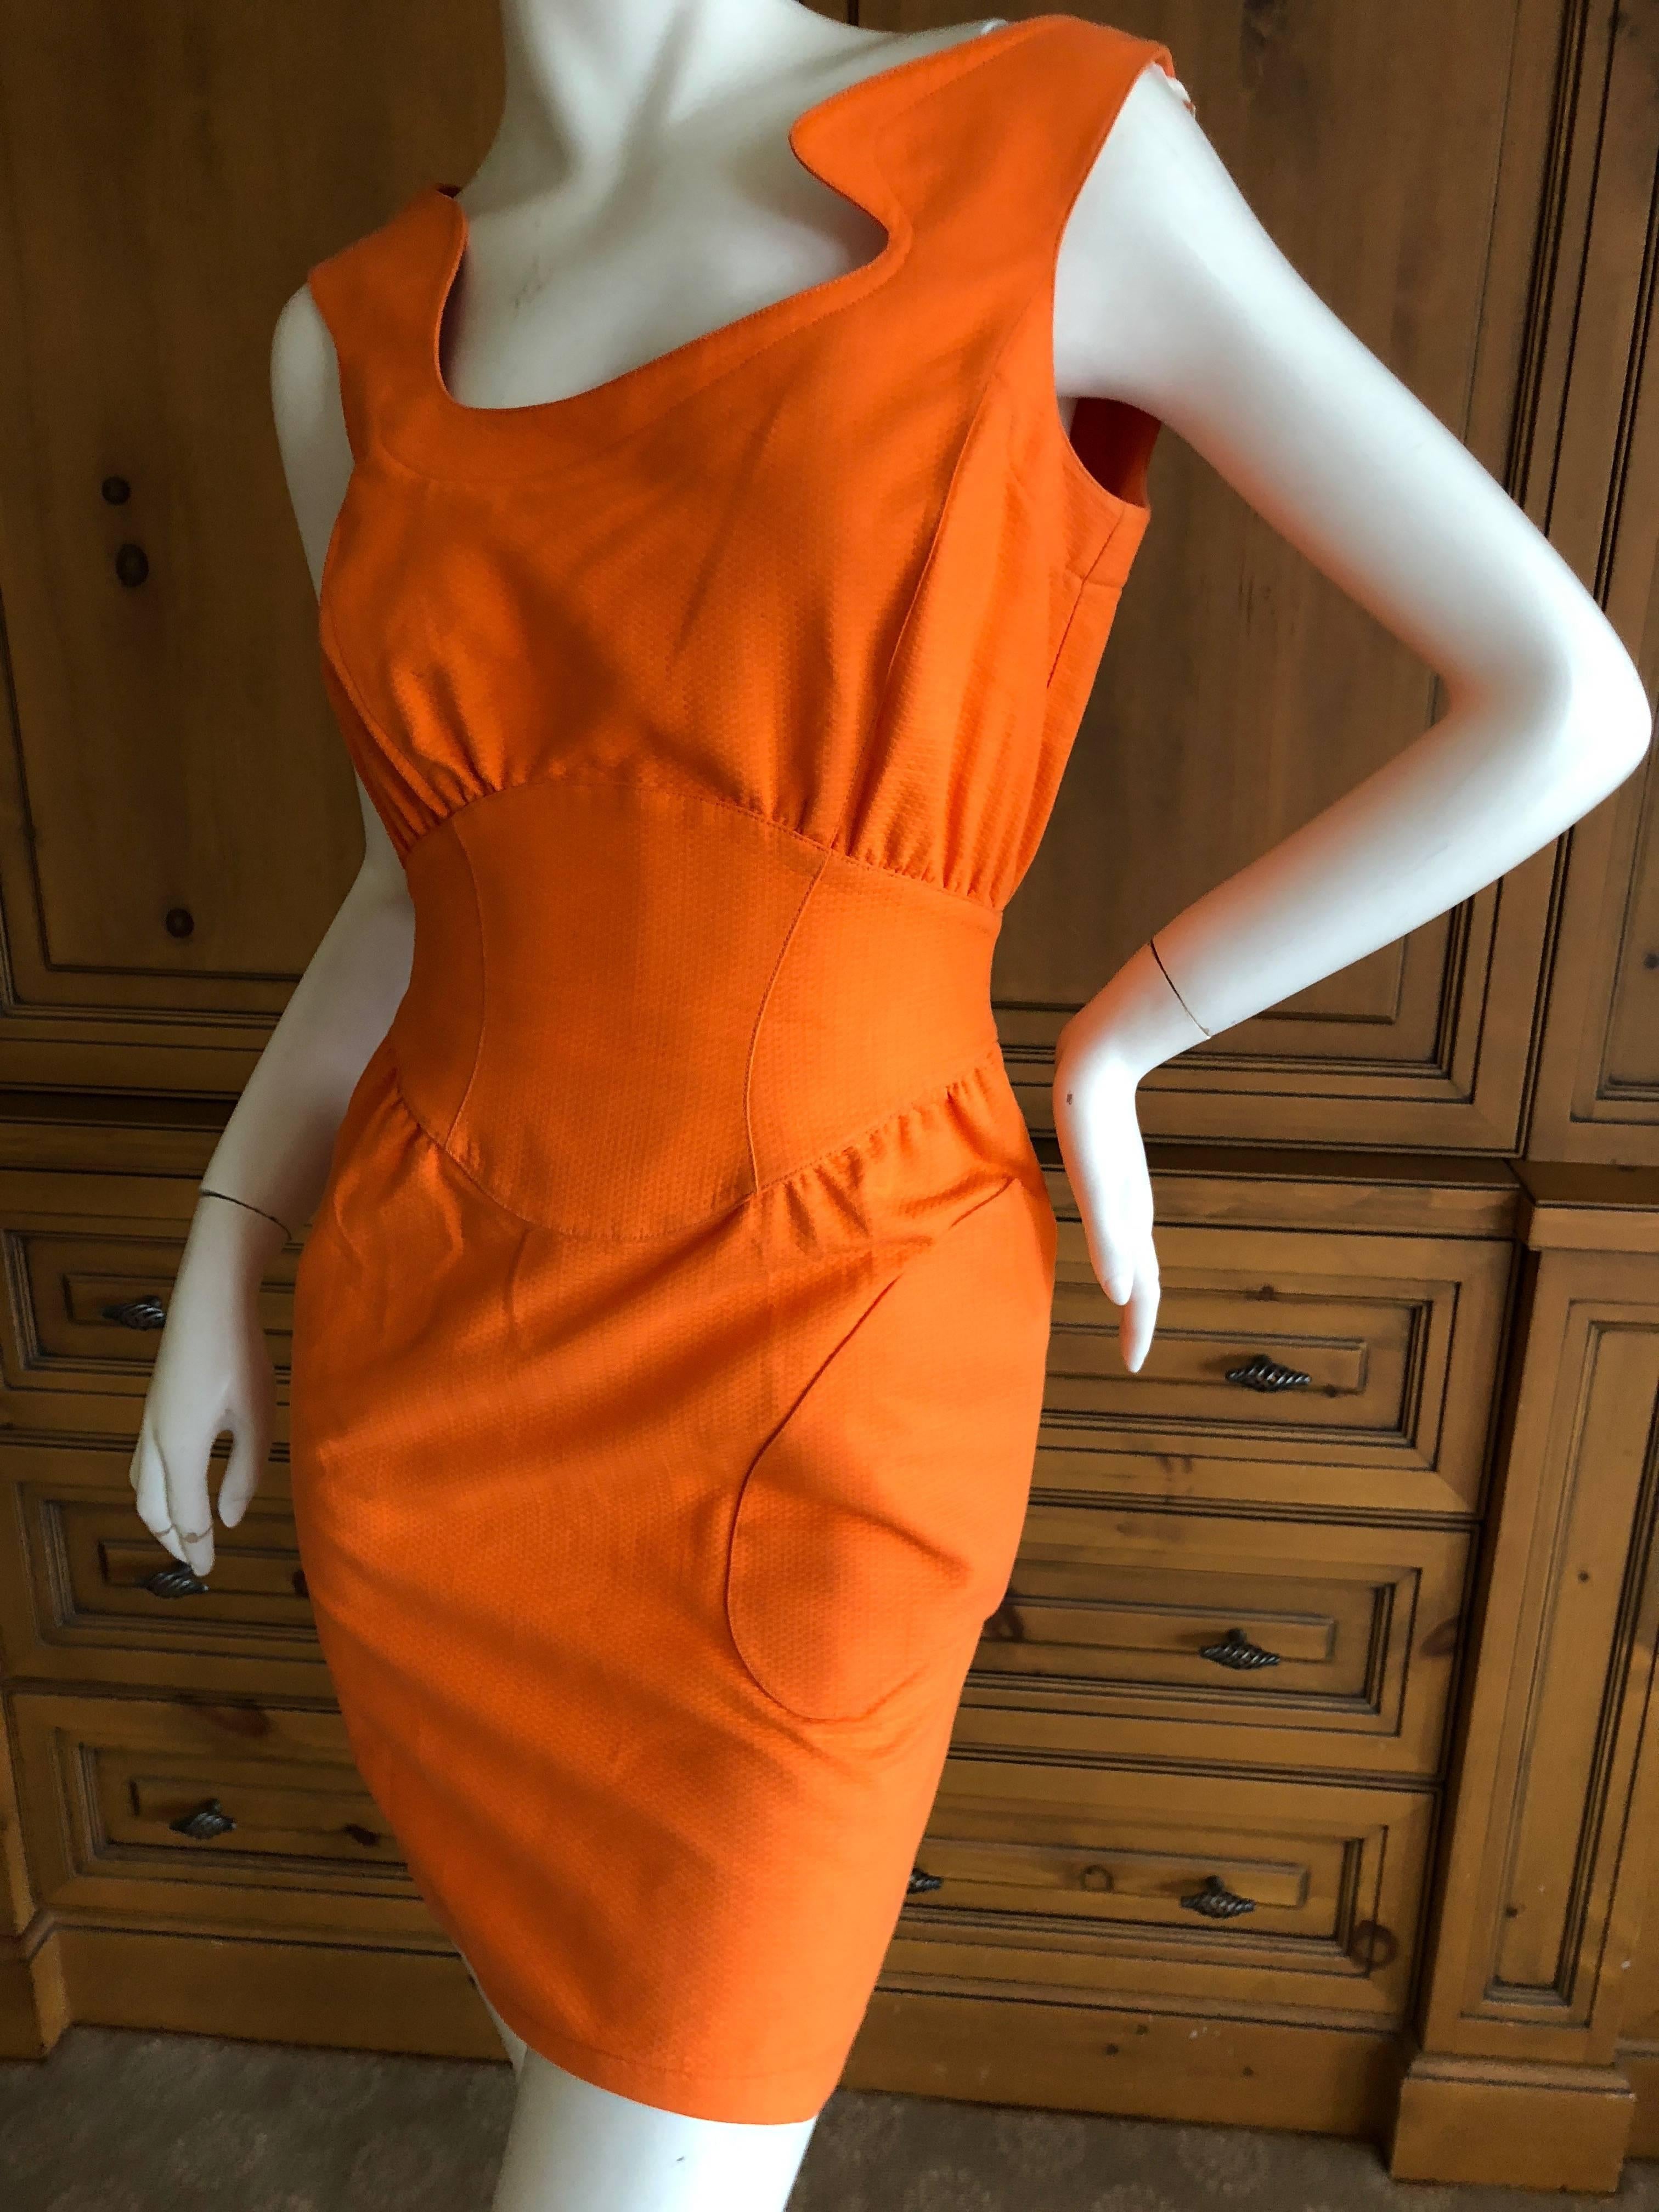 
	
	
Thierry Mugler Mod Vintage 80's Tangerine  Dress.
Snaps down the back.
Size 38

Bust 38